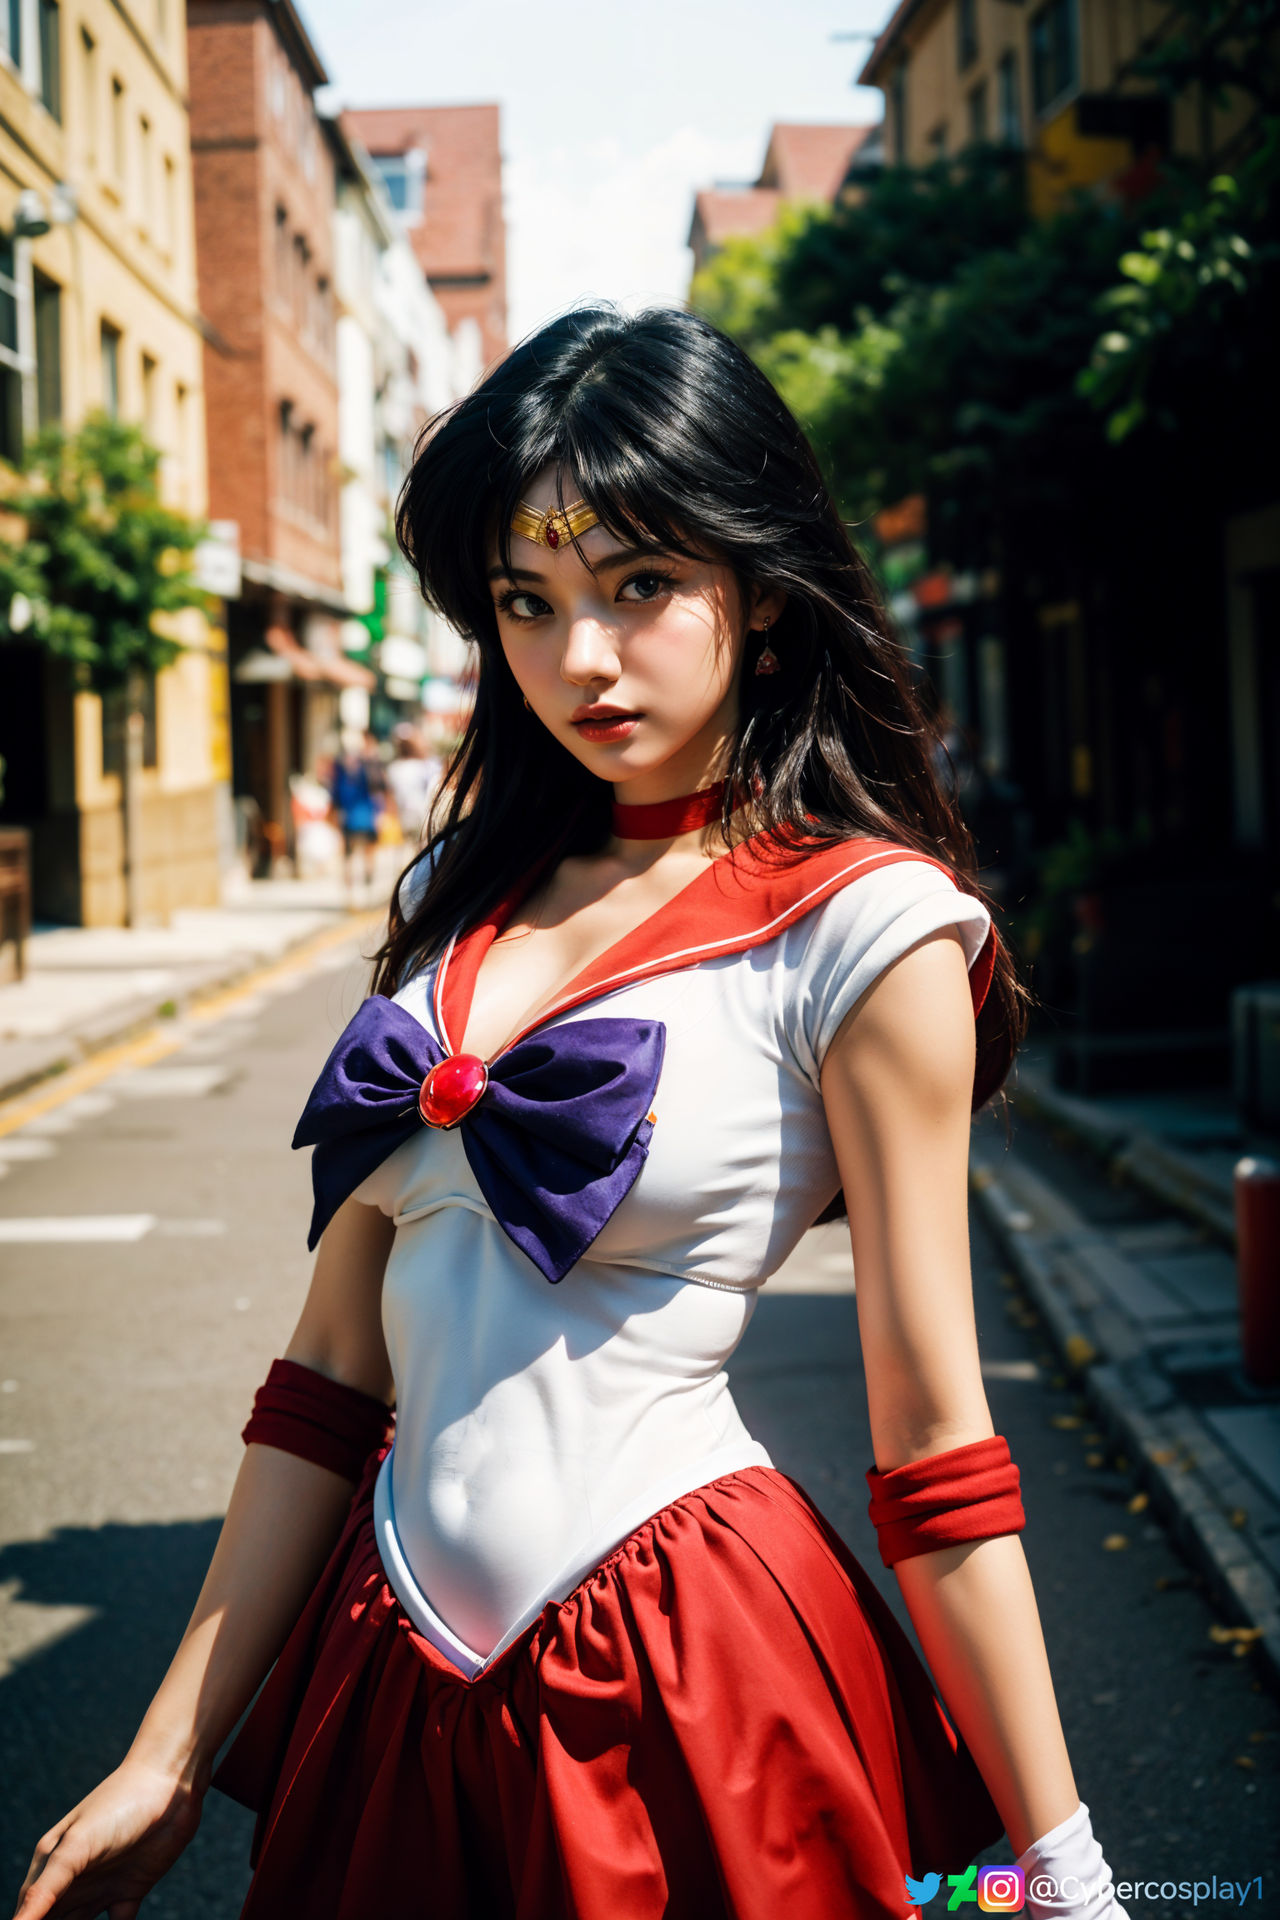 Rei Hino Ai cosplay 1 (4) by cybercosplay1 on DeviantArt